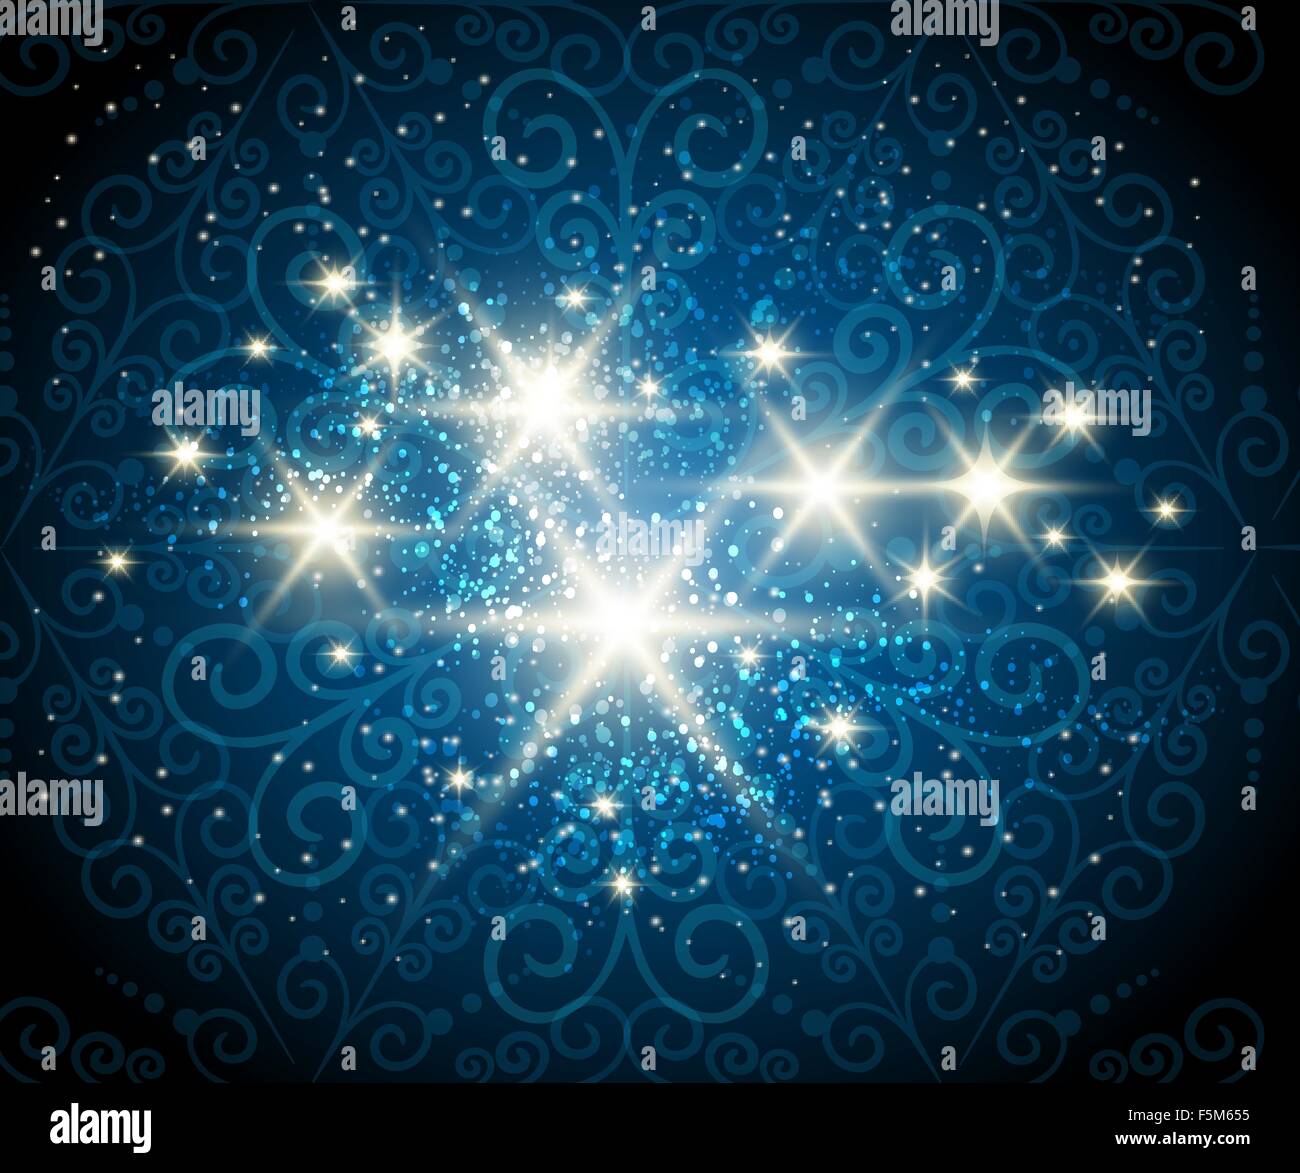 Dark blue background with shining stars against see through swirls pattern Stock Vector